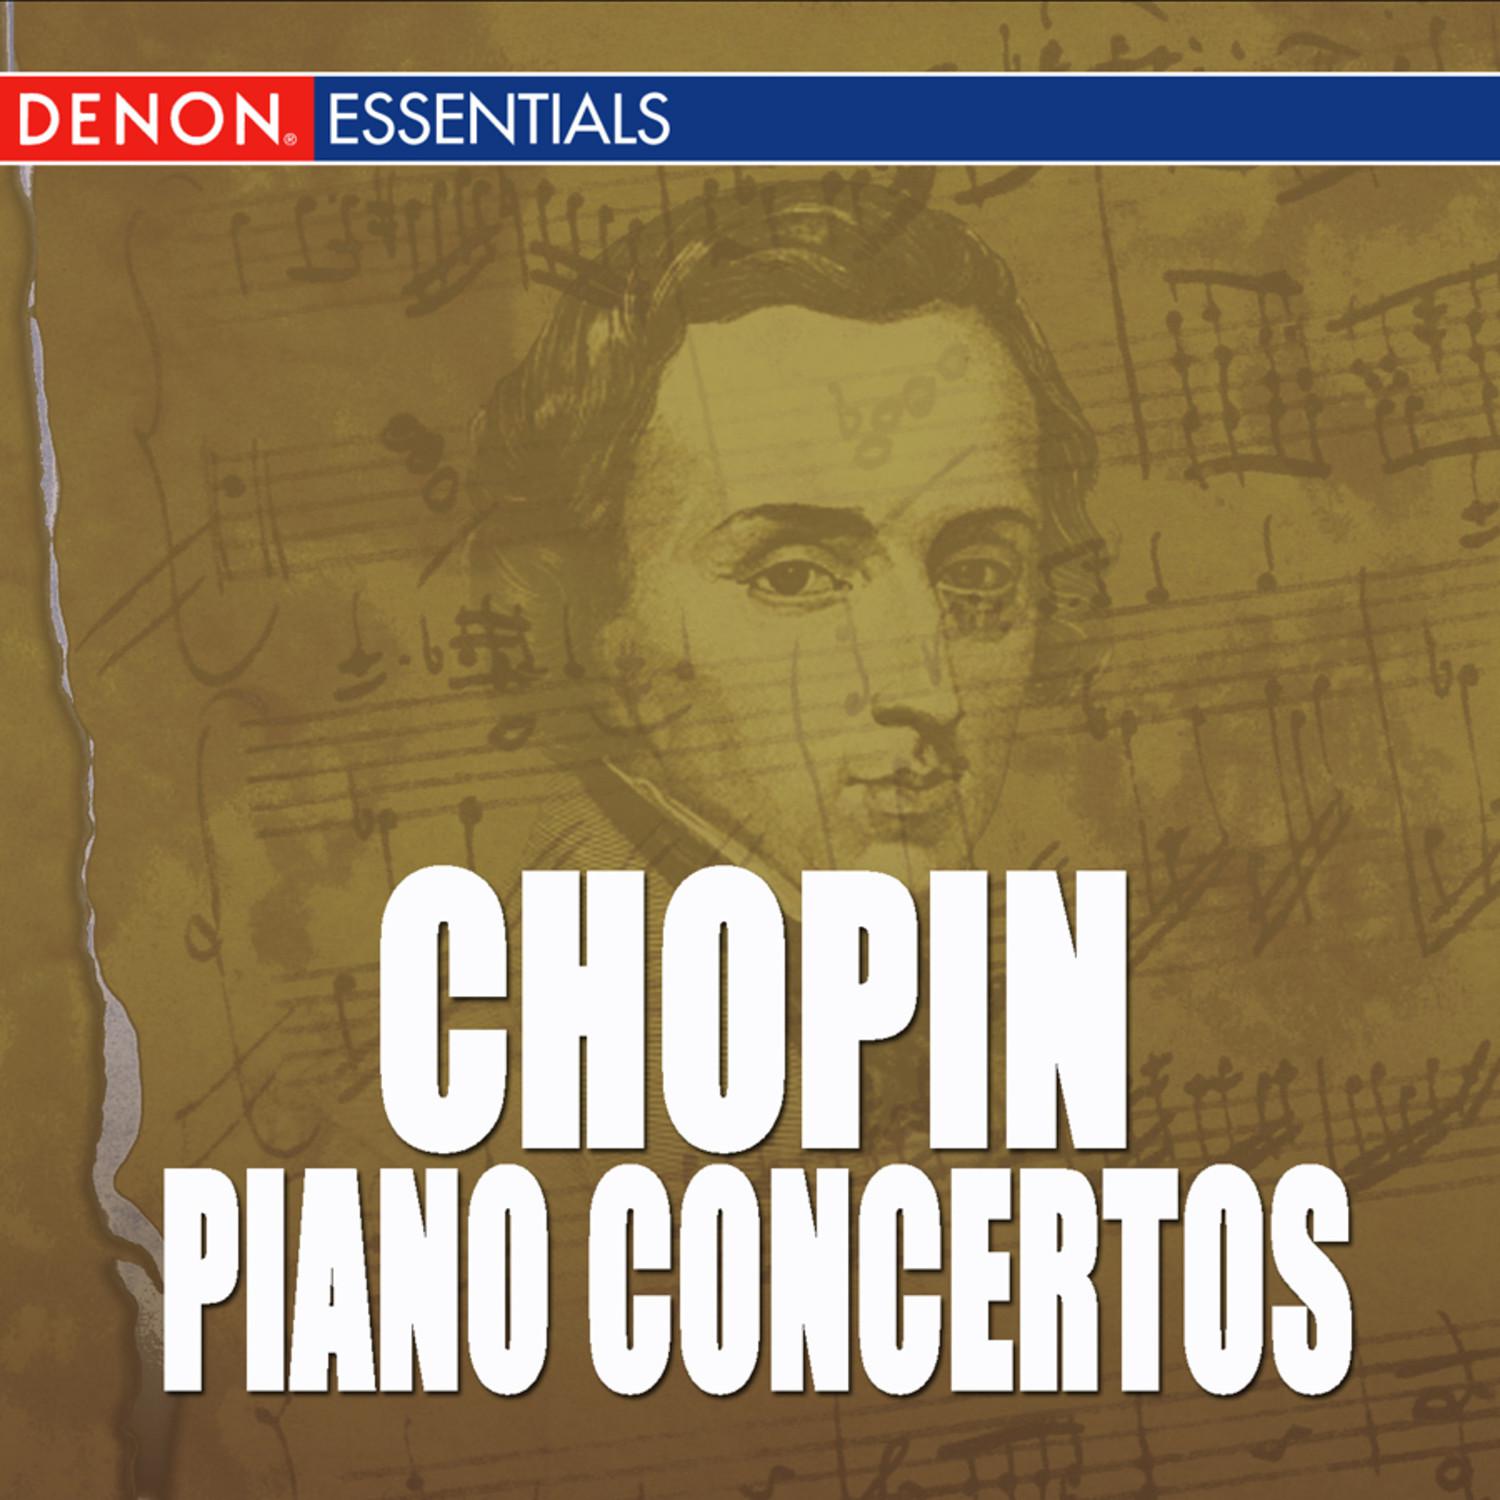 Concerto for Piano and Orchestra No. 2 in F Minor, Op. 21: II. Larghetto